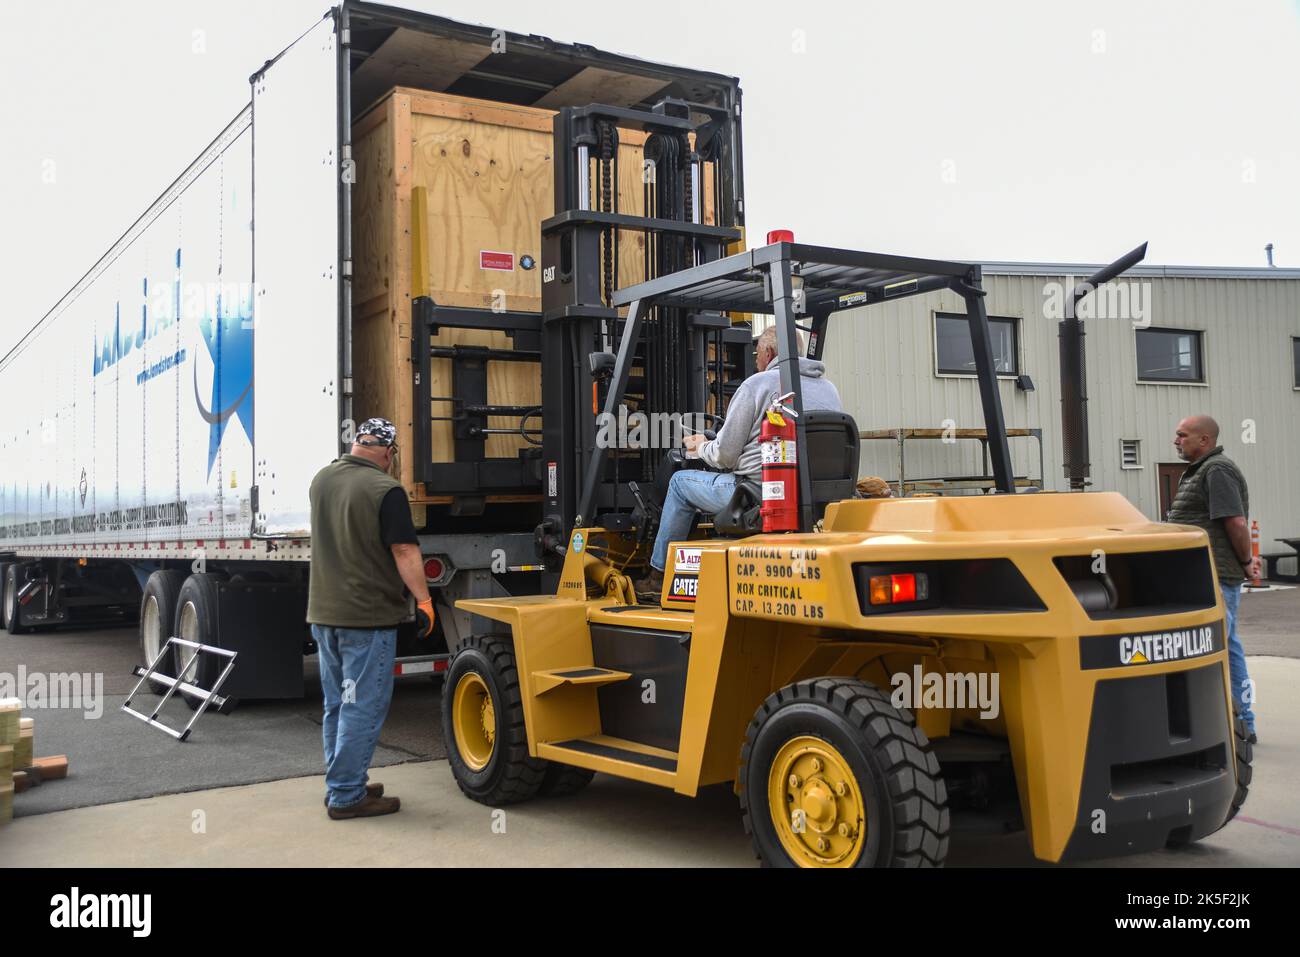 NASA’s Low-Earth Orbit Flight Test of an Inflatable Decelerator, or LOFTID, arrives by cargo truck at Vandenberg Space Force Base in California on Aug. 15, 2022. The technology demonstration mission will demonstrate inflatable heat shield technology that uses aerodynamic drag to slow down spacecraft in the most mass-efficient way. This technology could enable a variety of proposed NASA missions to destinations such as Mars, Venus, and Titan, as well as returning heavier payloads from low-Earth orbit. LOFTID is a rideshare launching with the National Oceanic and Atmospheric Administration’s (NO Stock Photo